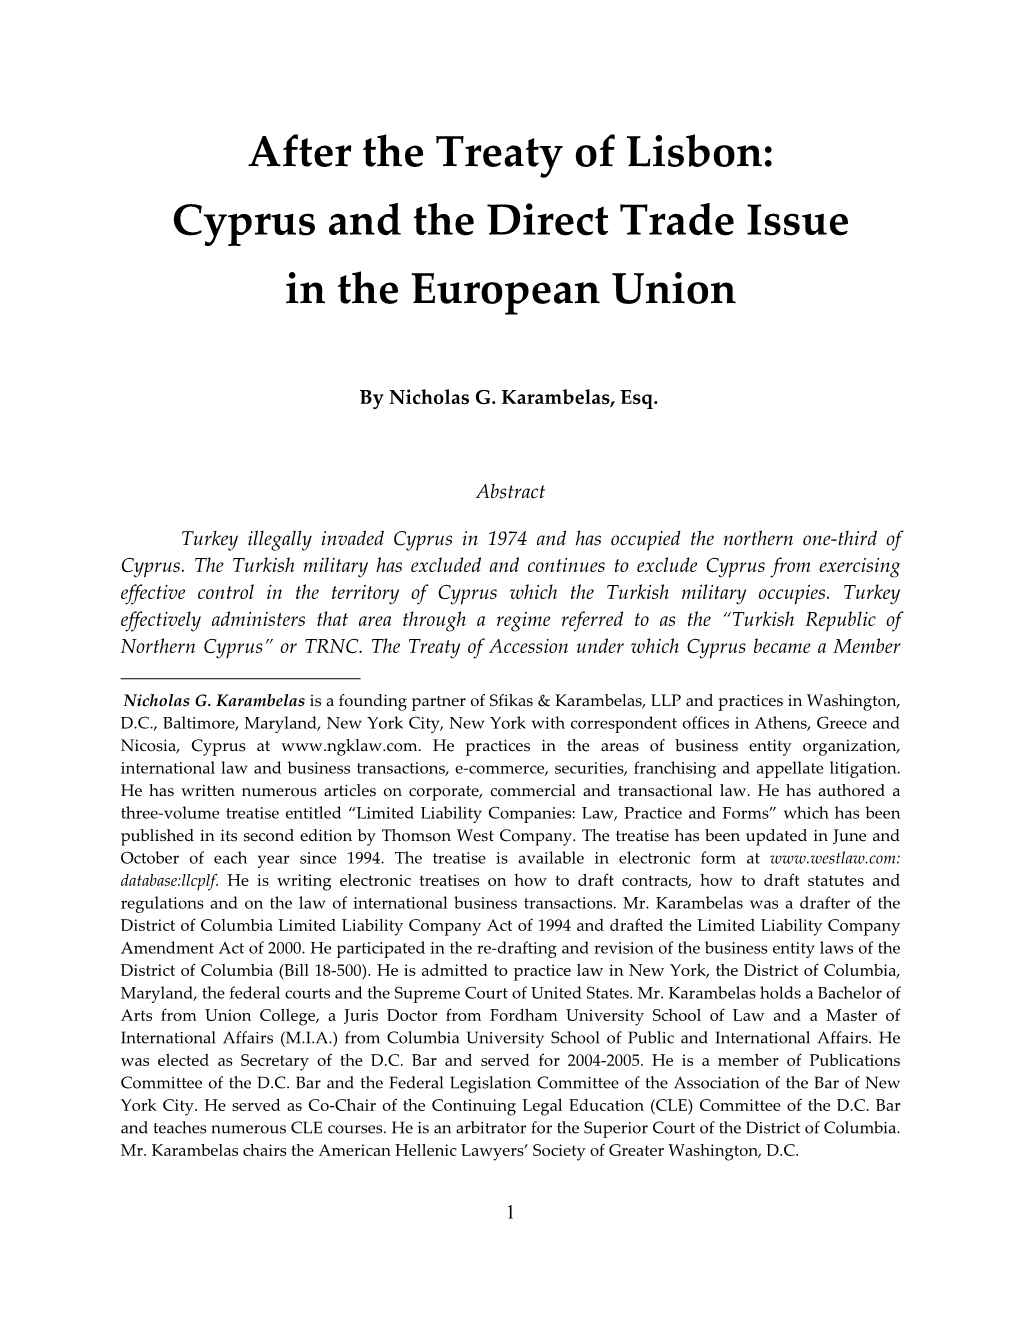 After the Treaty of Lisbon: Cyprus and the Direct Trade Issue in the European Union